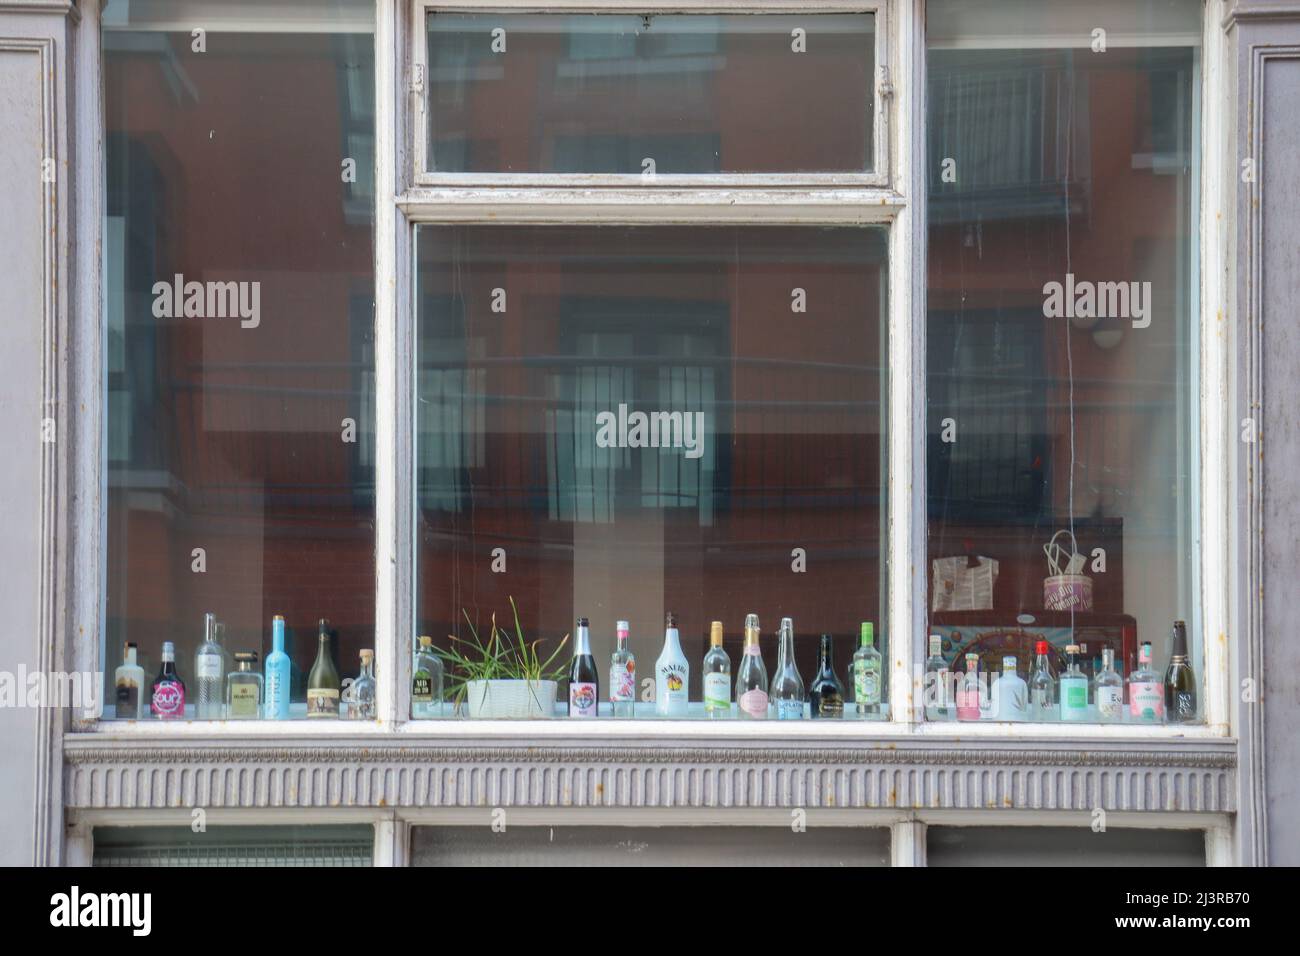 Student Accommodation, alcohol bottles lined up in a window Stock Photo